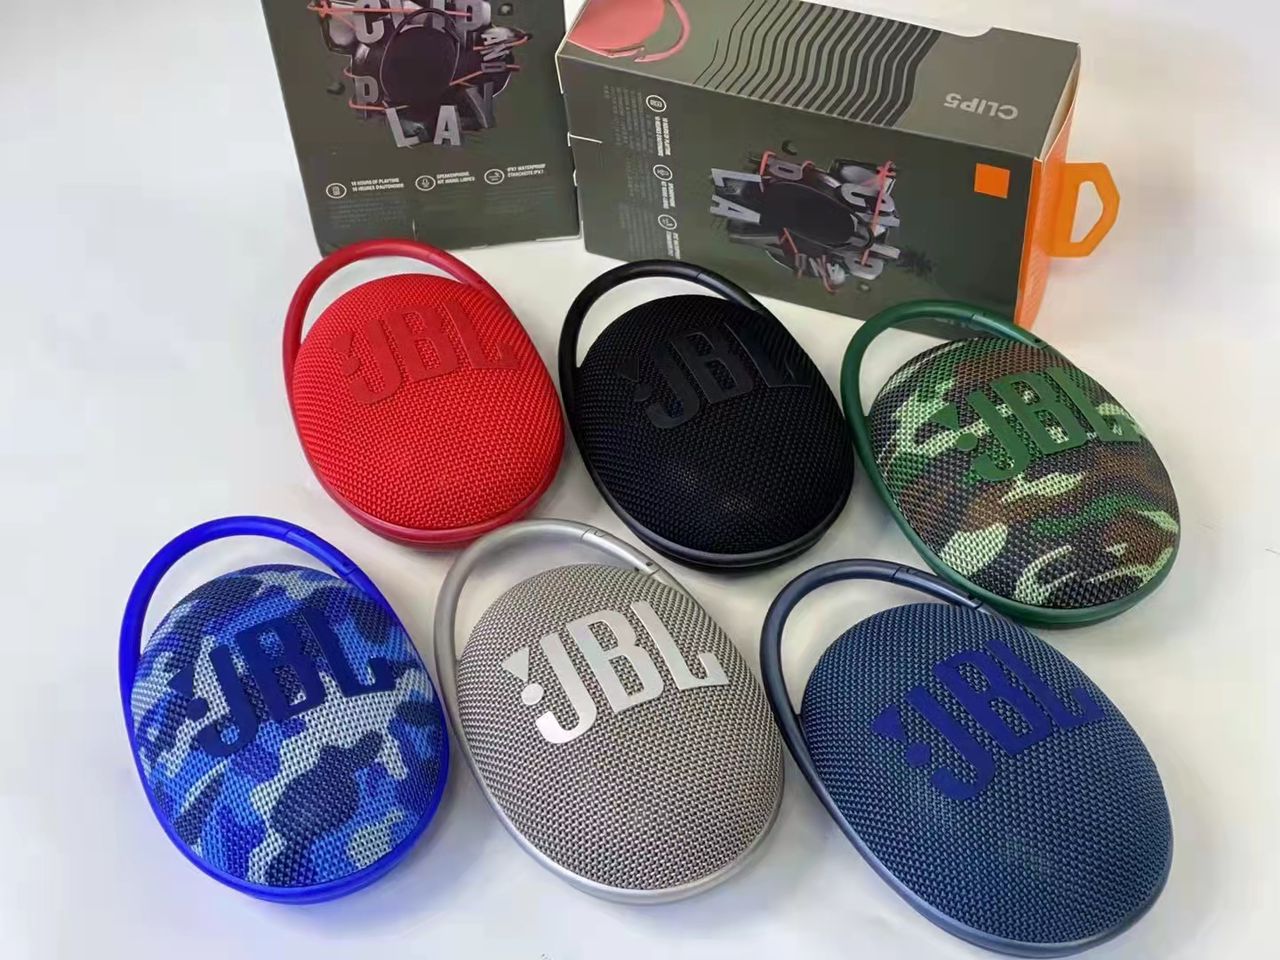 Buy-or-shop-online-Namibia-for-a-Wireless-JBL-Bluetooth-Mini-Music-Waterproof-Speaker-Portable-Outdoor-Bass-Speaker-Available-on-yormarket-an-online-shopping-marketplace.-8jpg